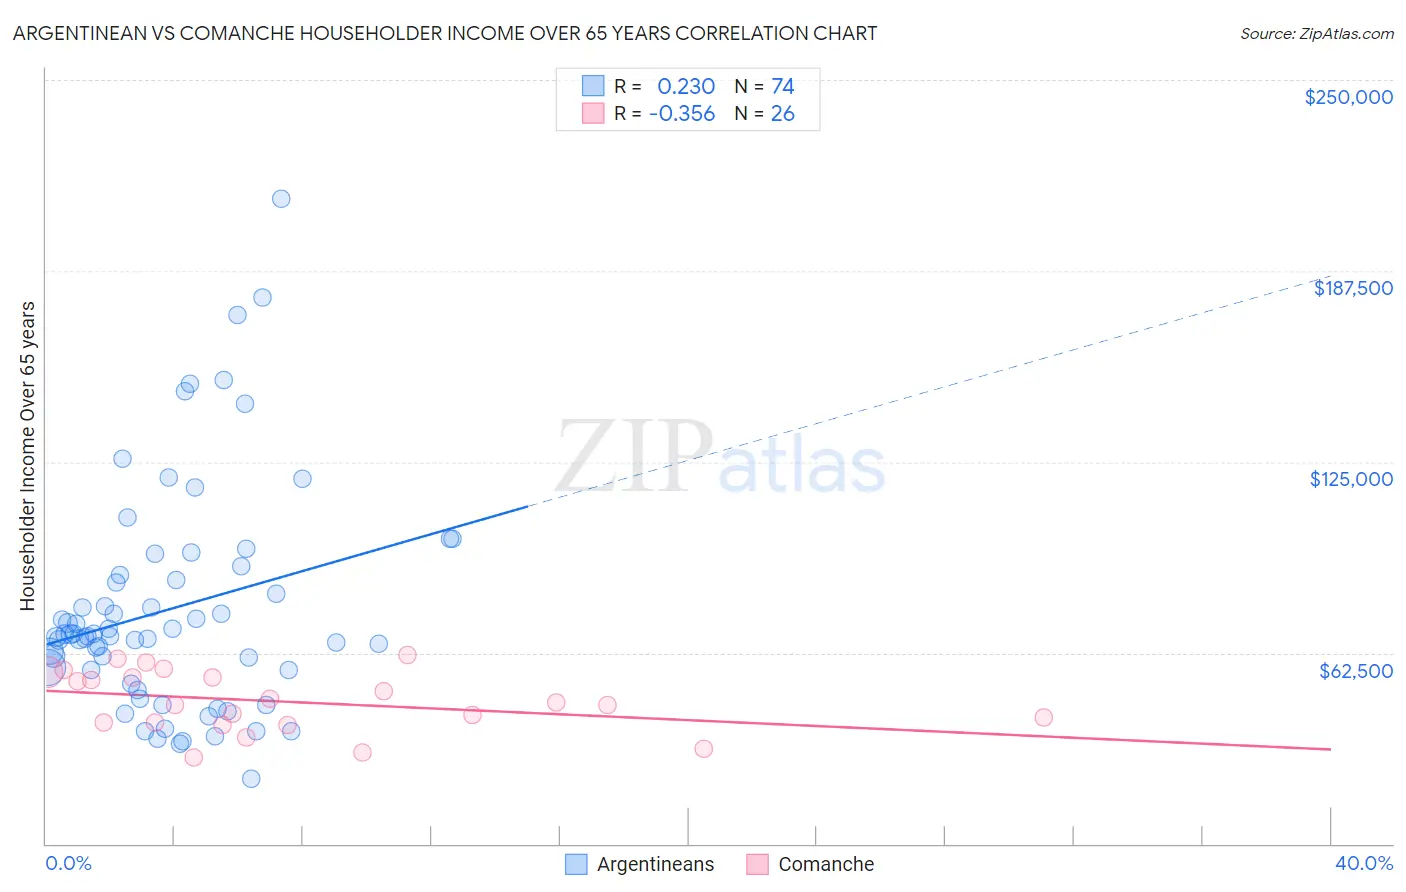 Argentinean vs Comanche Householder Income Over 65 years